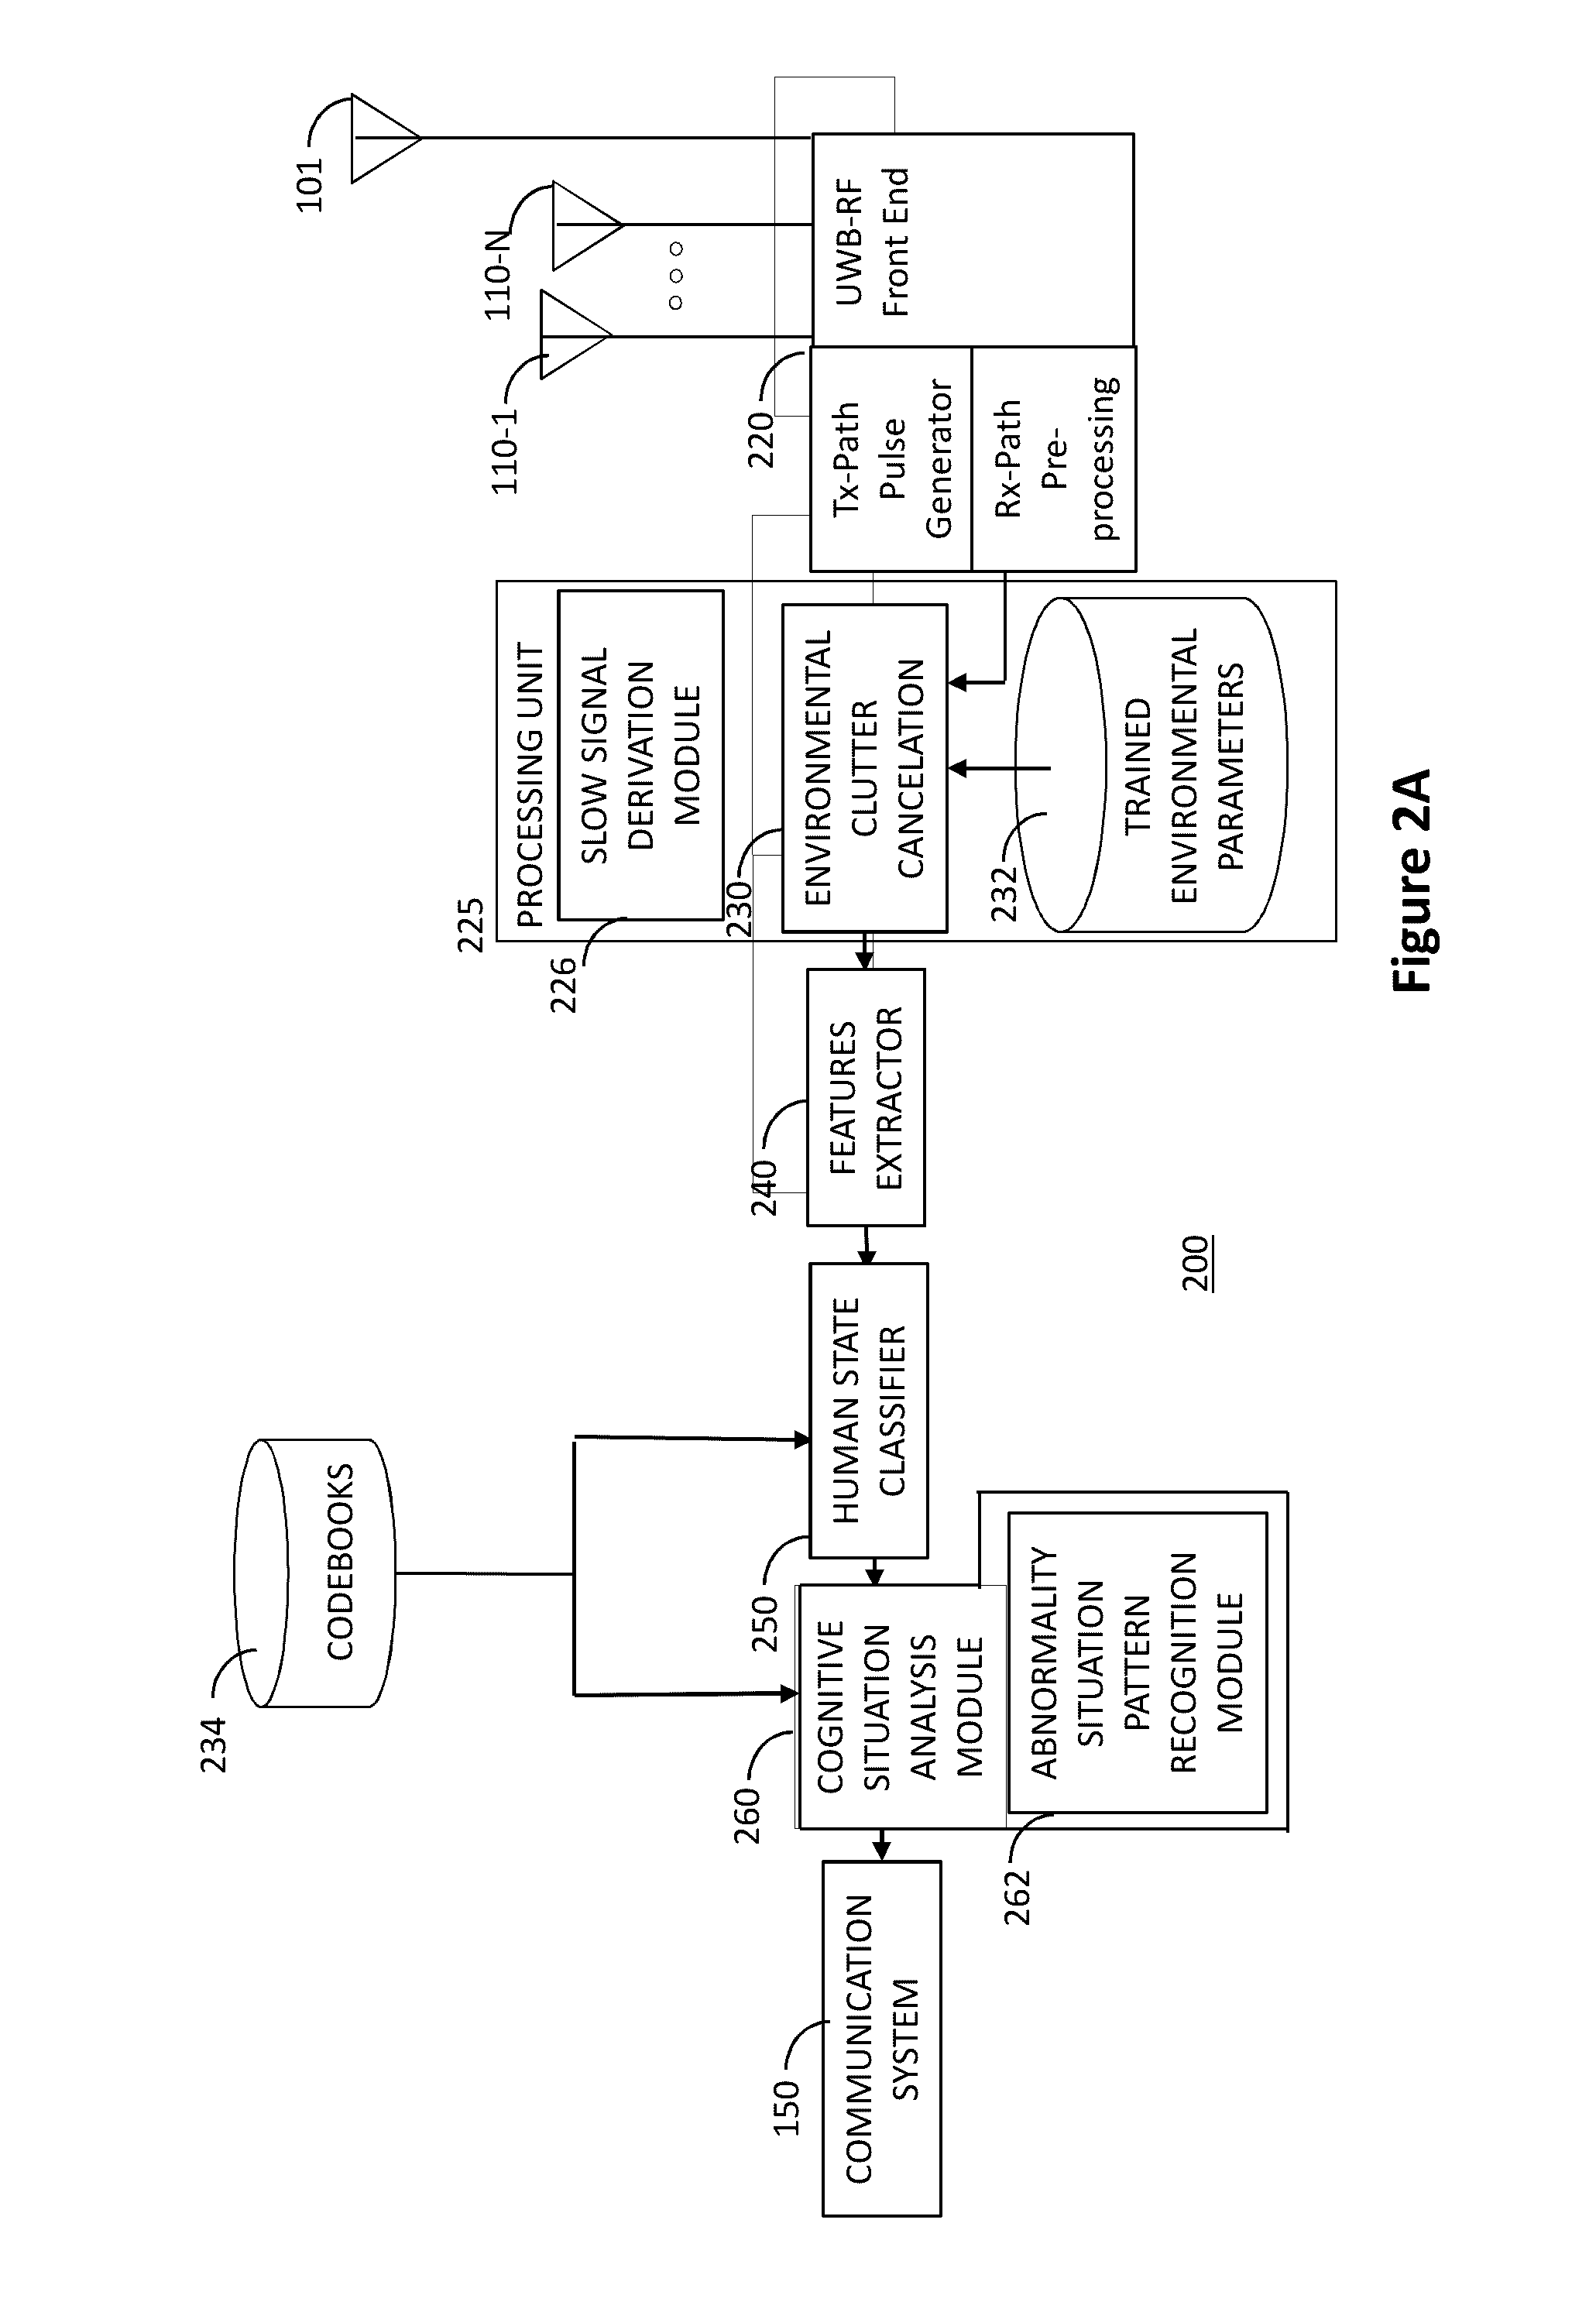 Human motion feature extraction in personal emergency response systems and methods